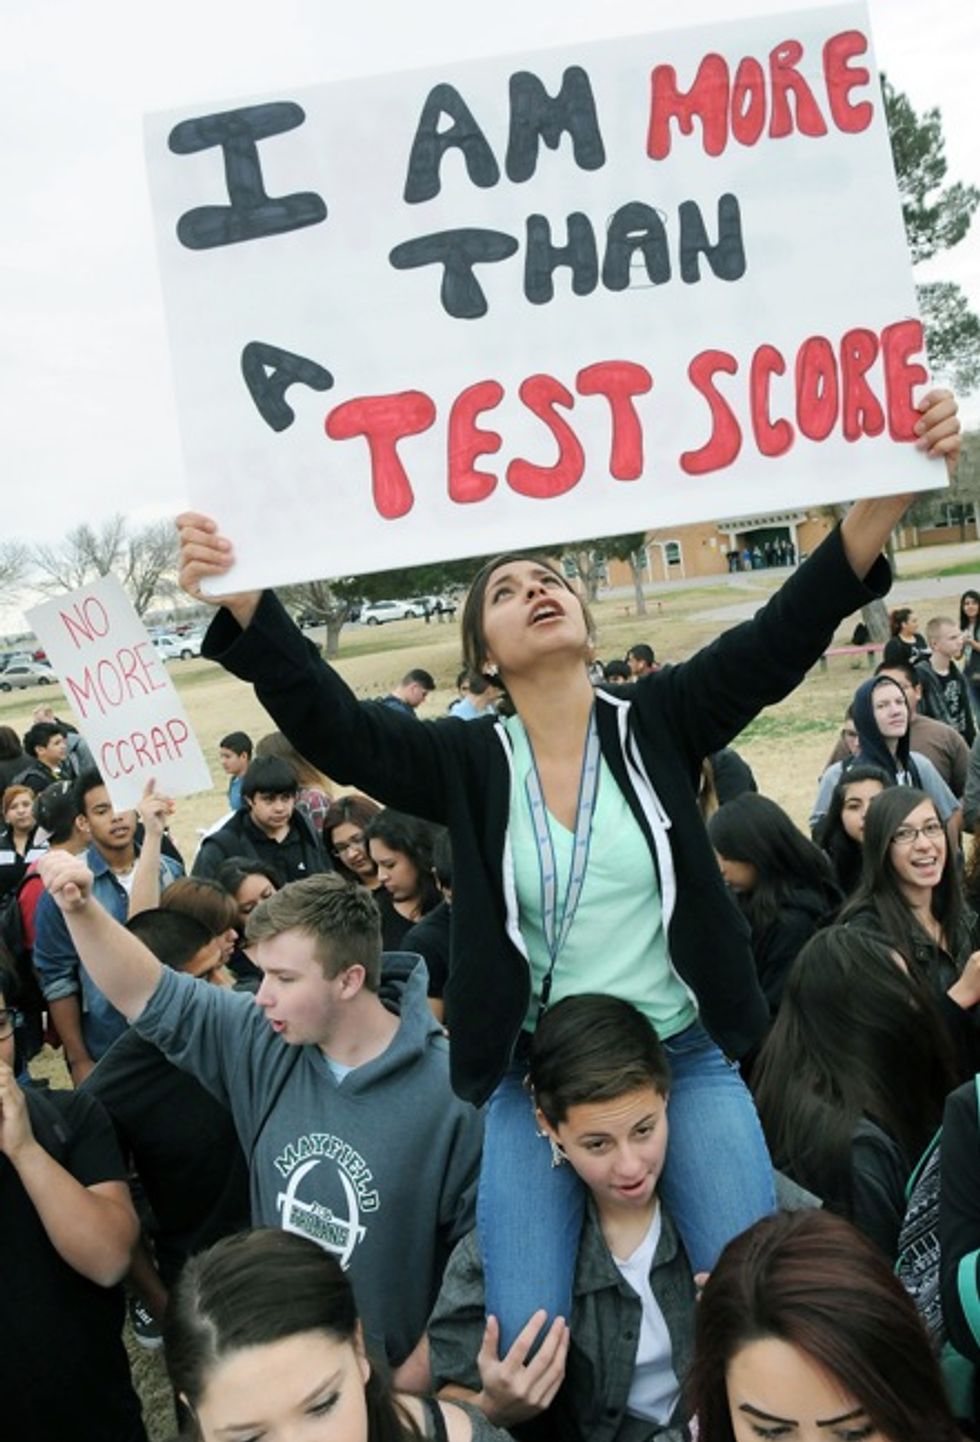 Test Based on Common Core Standards Sees Tech Glitches, Protests: ‘Not Ready for Prime Time’